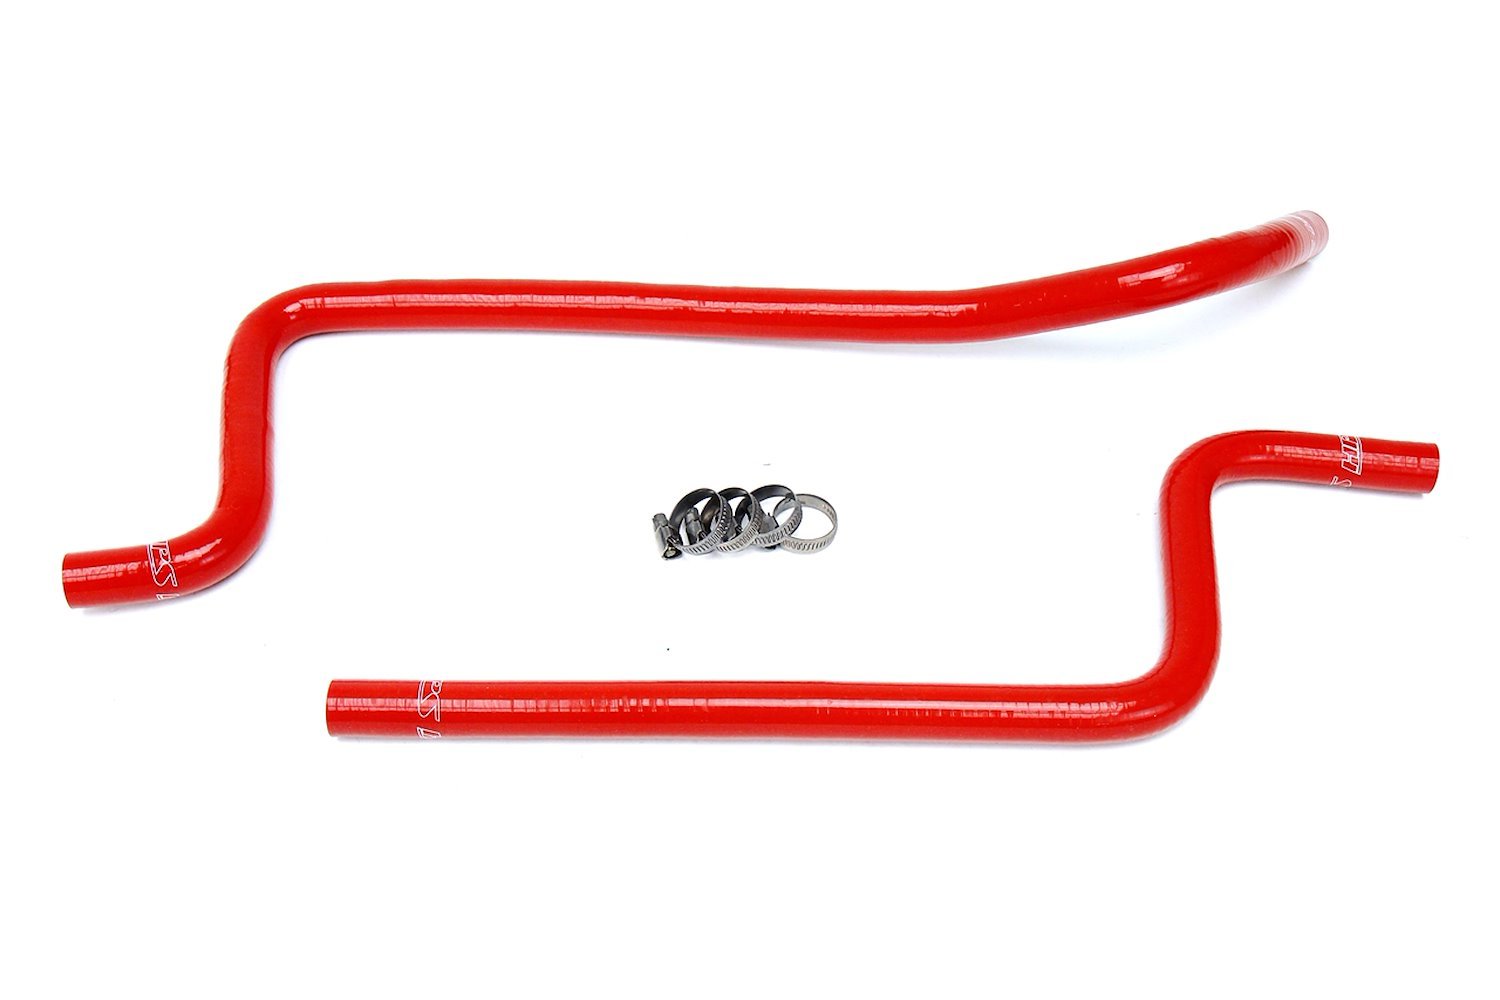 57-1221H-RED Heater Hose Kit, High-Temp 3-Ply Reinforced Silicone, Replace OEM Rubber Heater Coolant Hoses